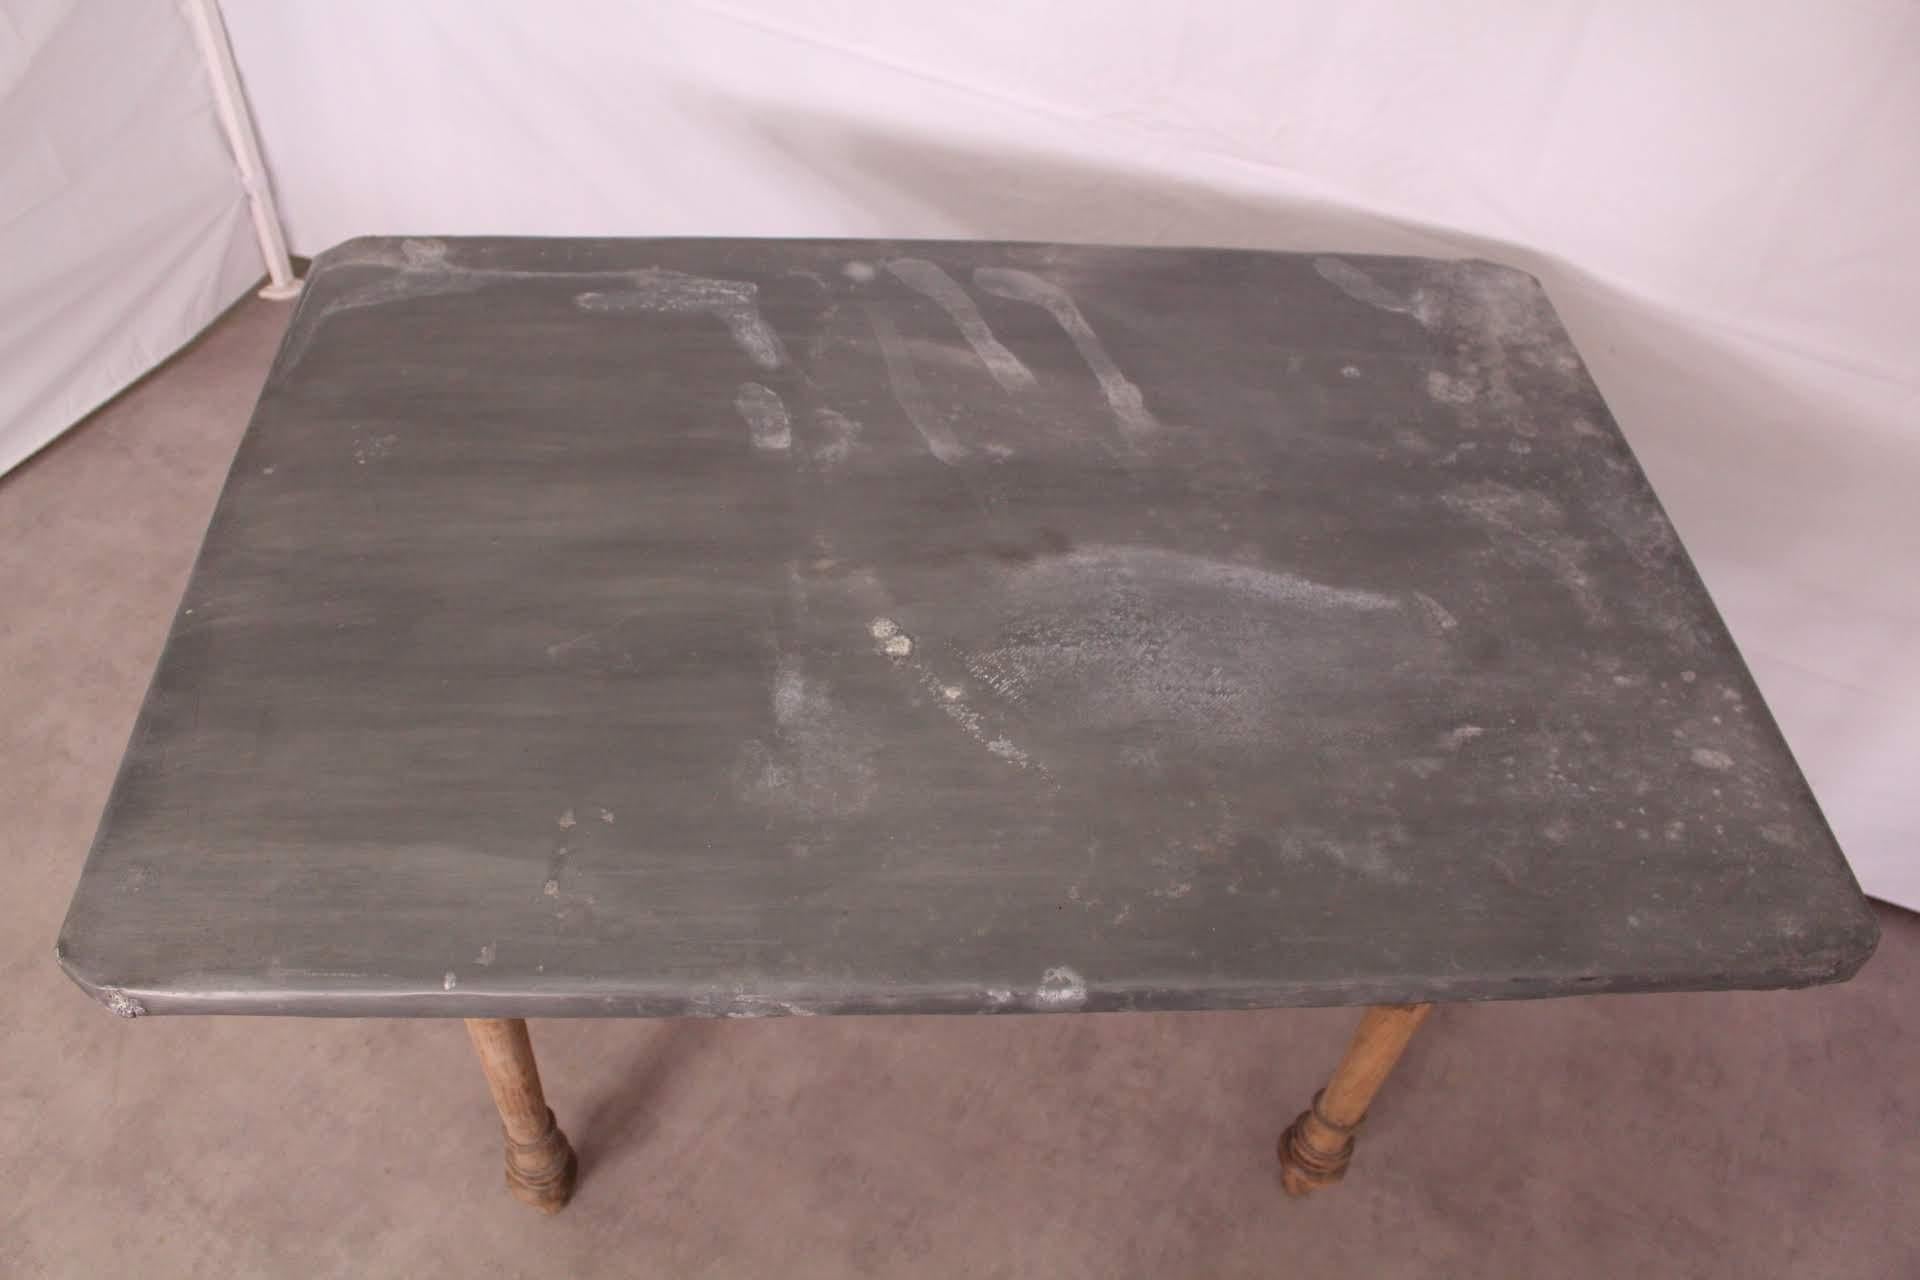 Zinc top side table kitchen worktable, French, 19th century
Farm house kitchen
Turned legs
Base can be customized to suit your interior if required
Good condition with signs of age and use from a French farm house working Kitchen
Zinc top could